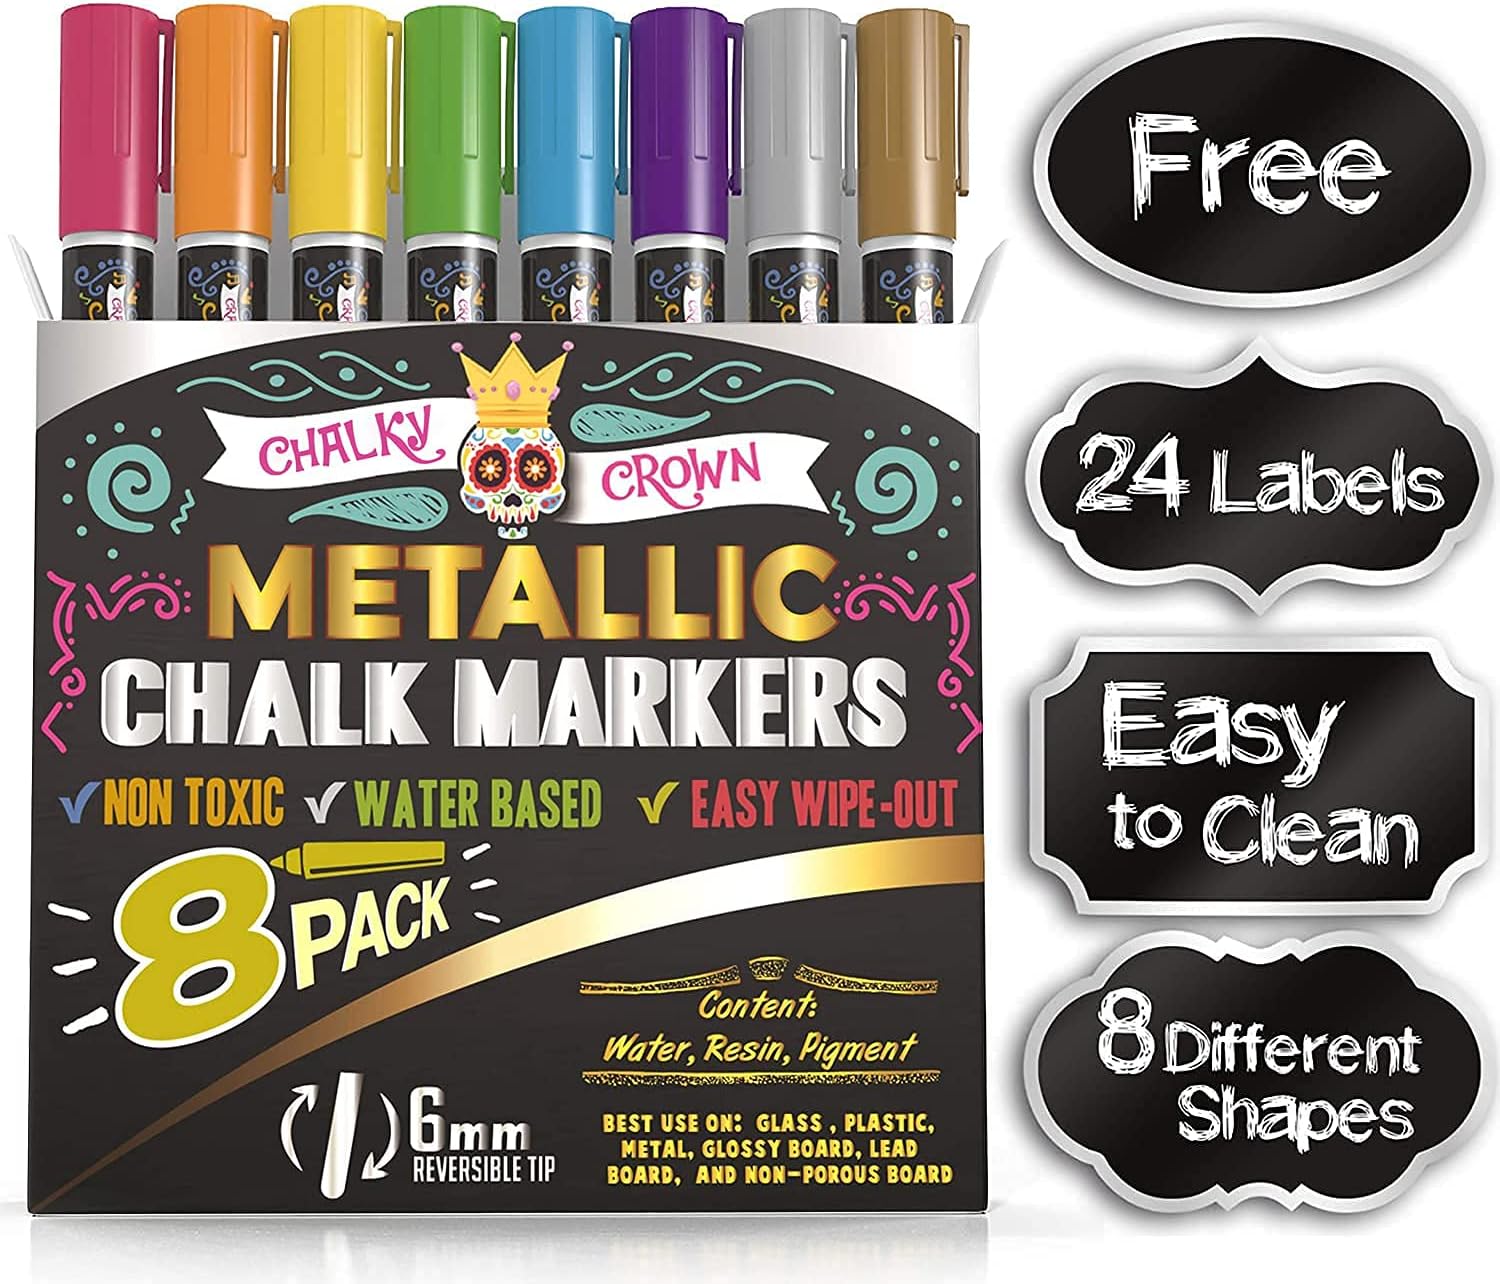 Chalky Crown Liquid White Chalk Markers Pens - White Dry Erase Marker - Chalk Markers for Chalkboard Signs, Windows, Blackboard, Glass - 5